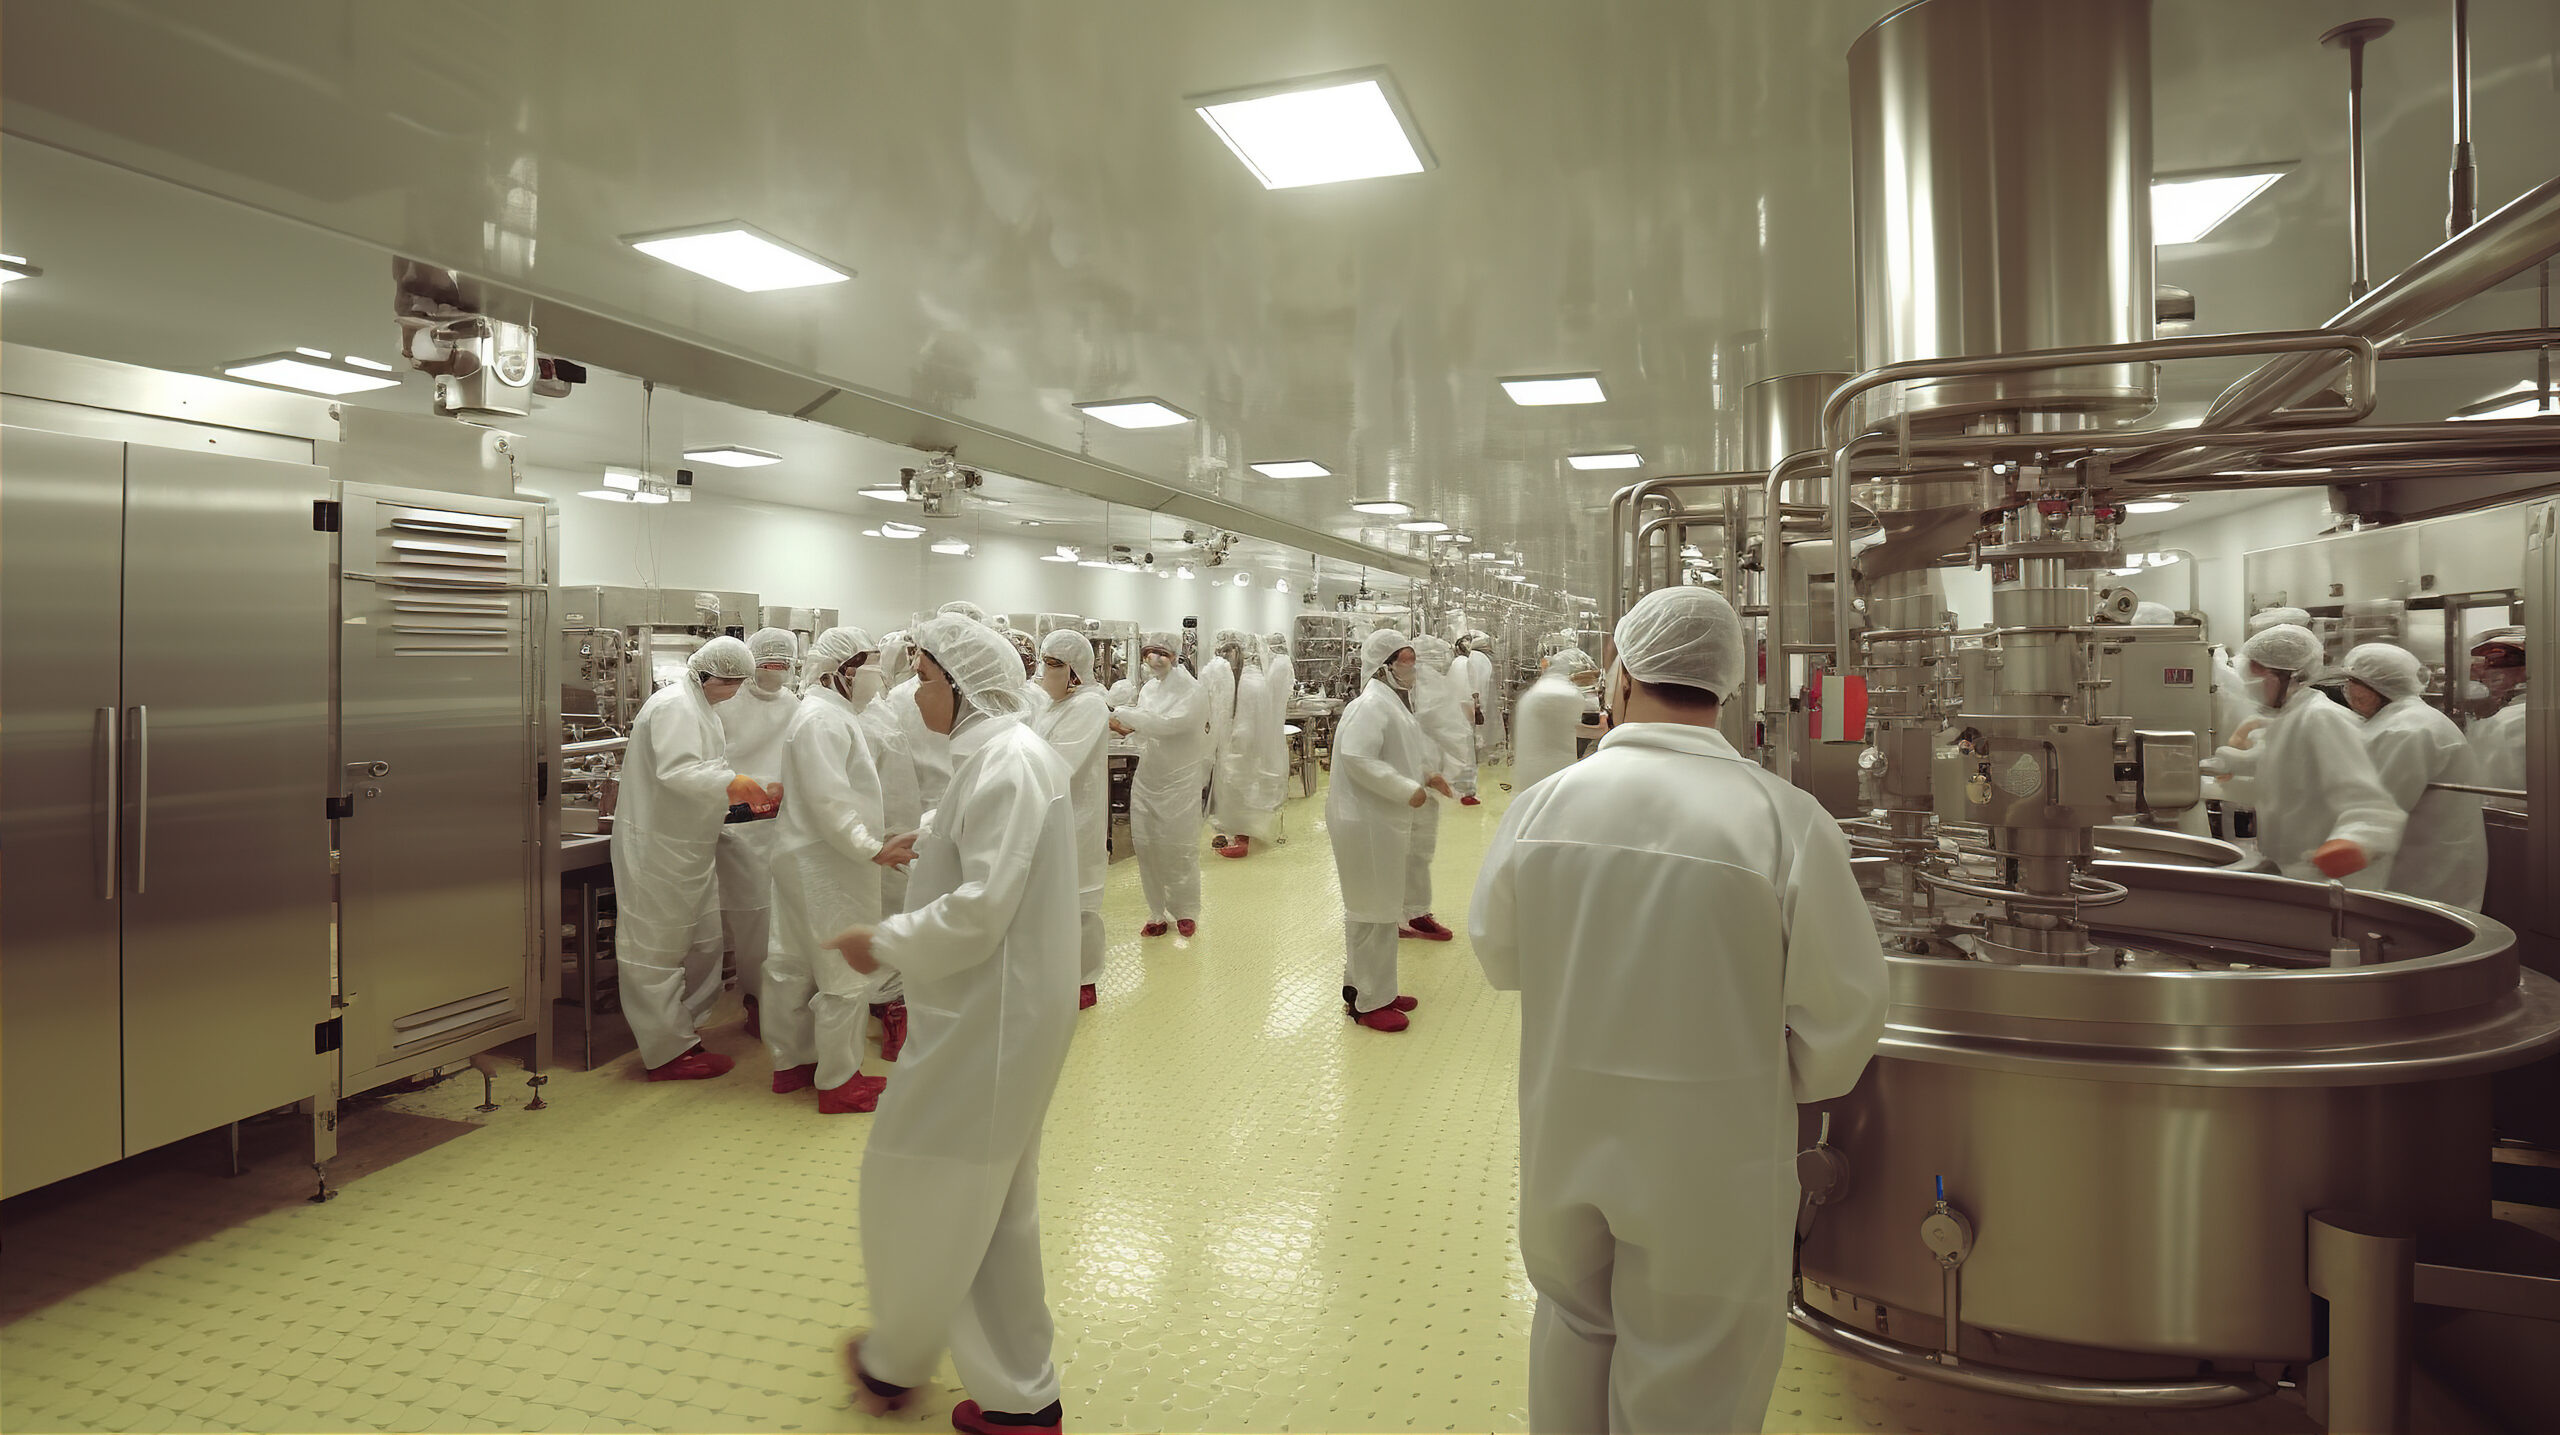 A food manufacturing plant. Indoors, no windows, fluorescent lights above. Everyone wearing white full-body suits from the neck down, and also with white hats/hair nets. The floor is spotless, but it's an ugly off-yellow color.